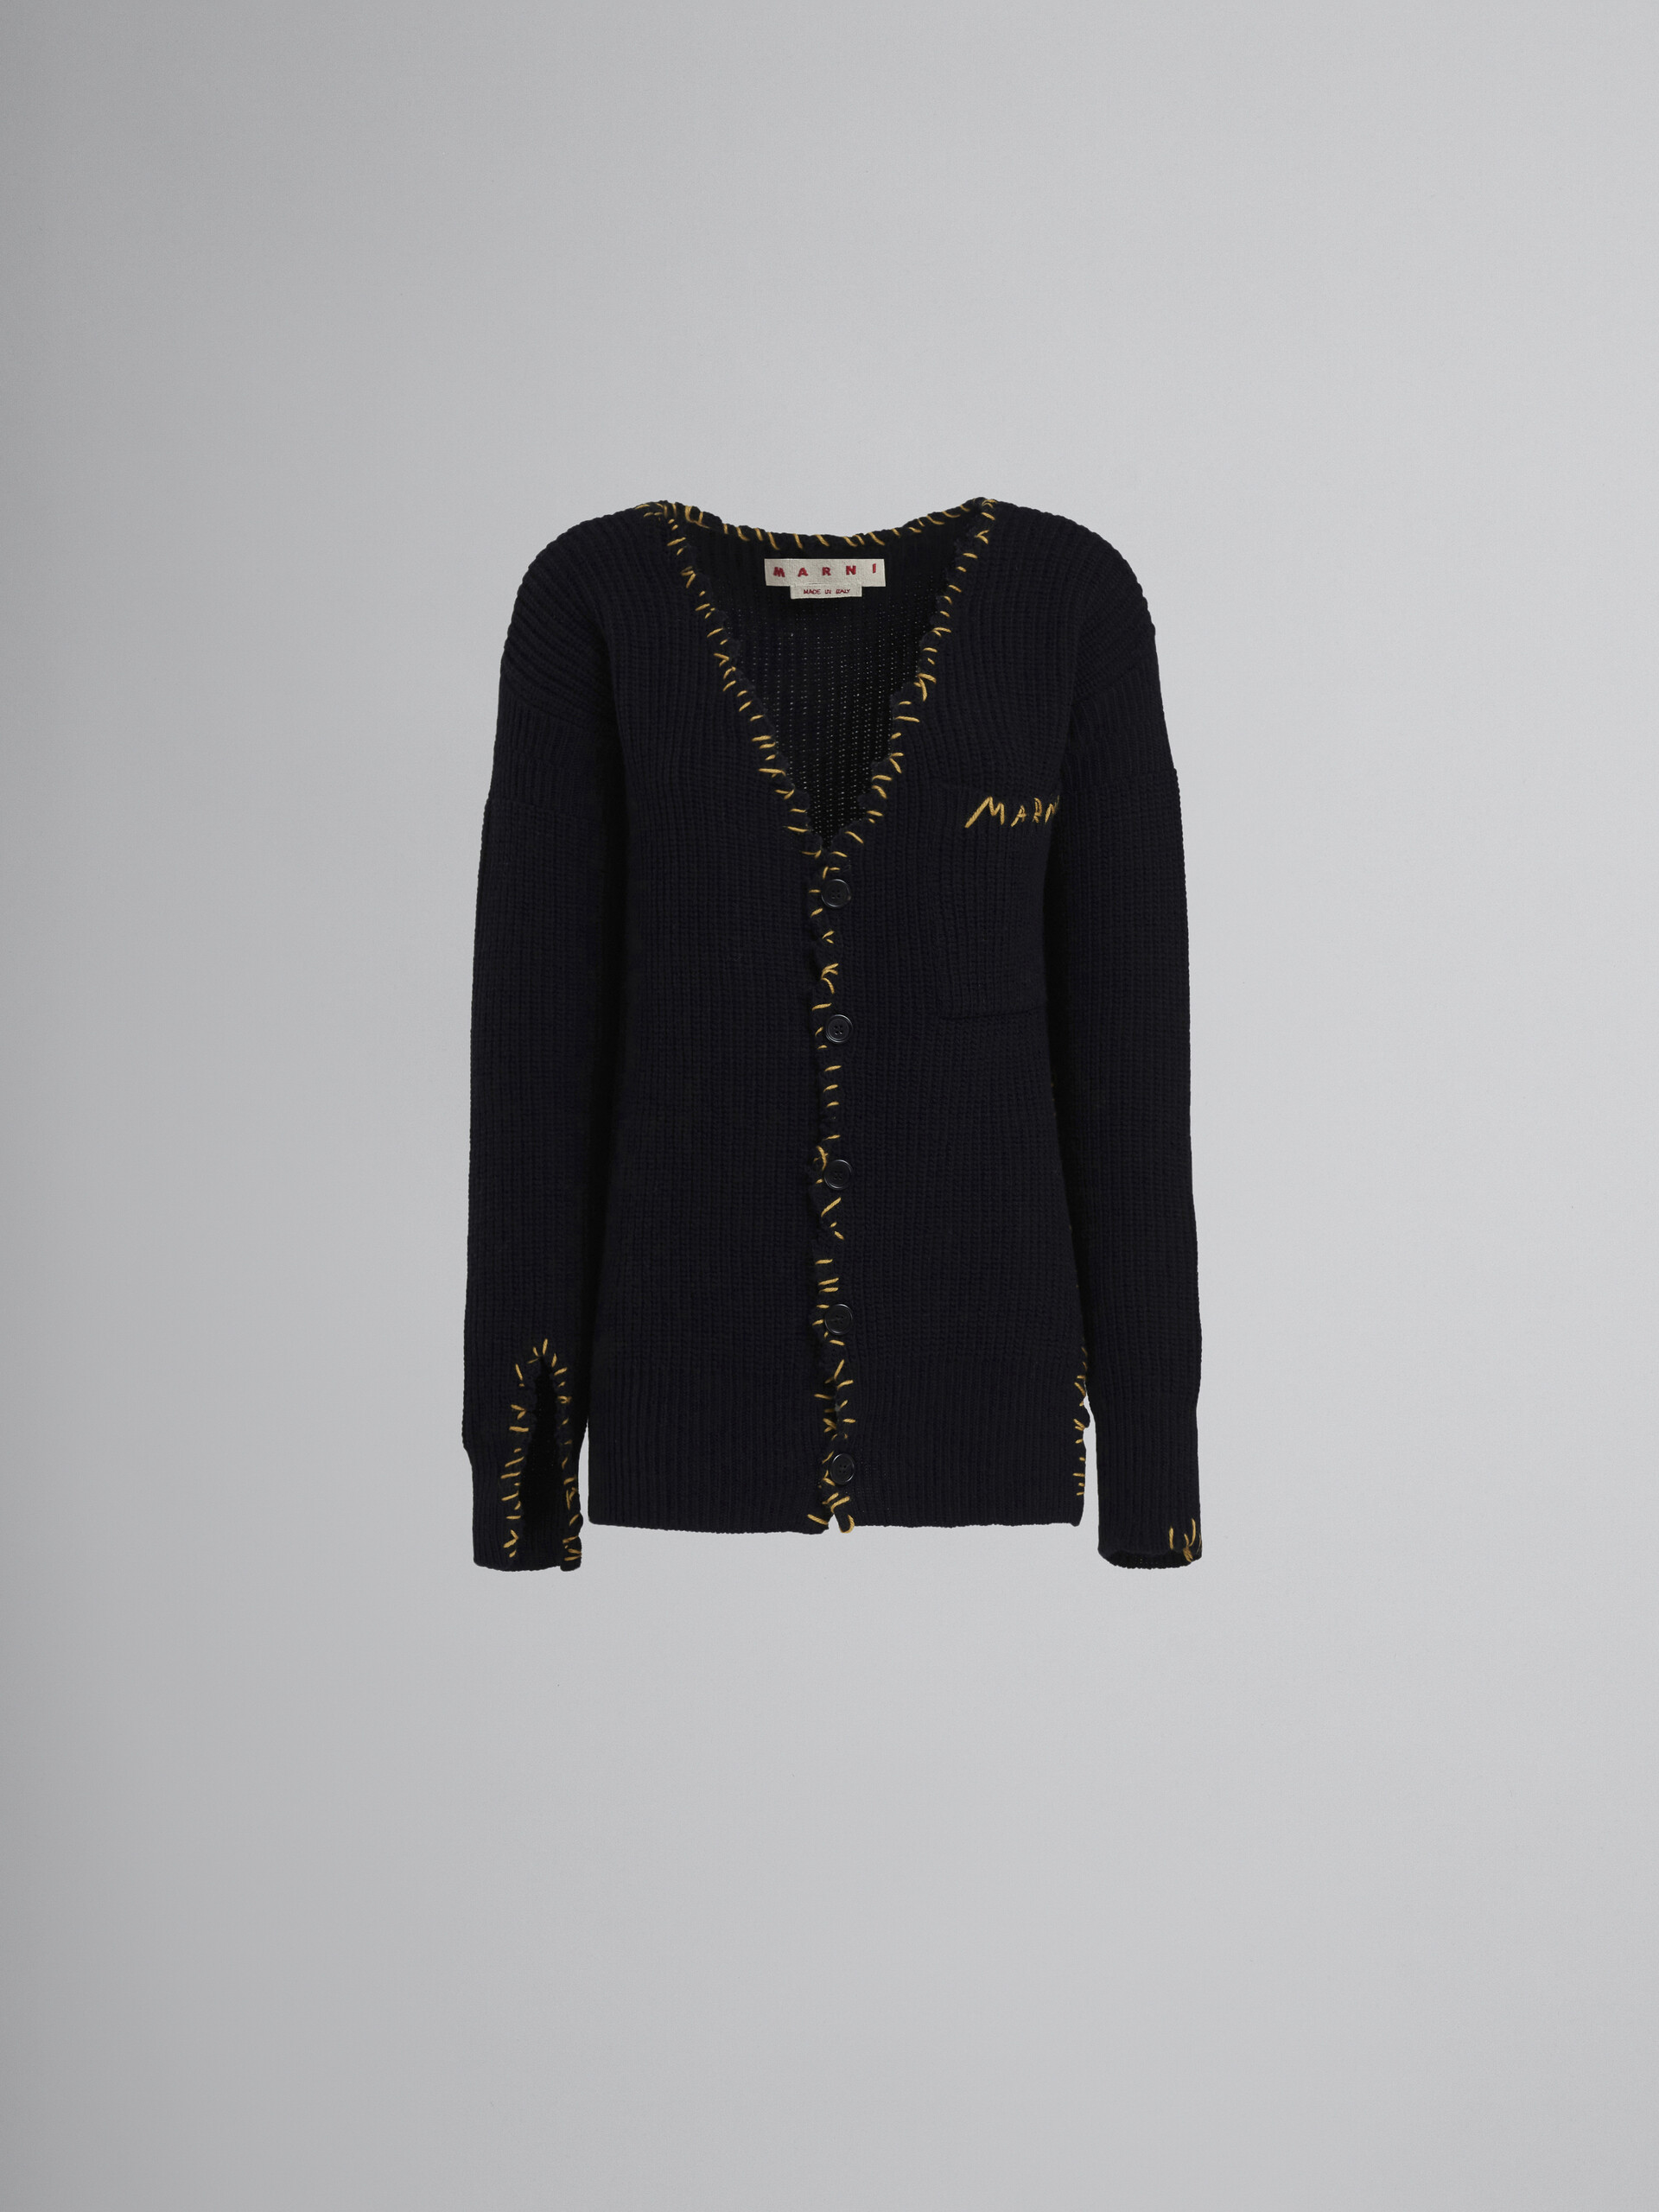 Black wool cardigan with raw-edge detailing - Pullovers - Image 1